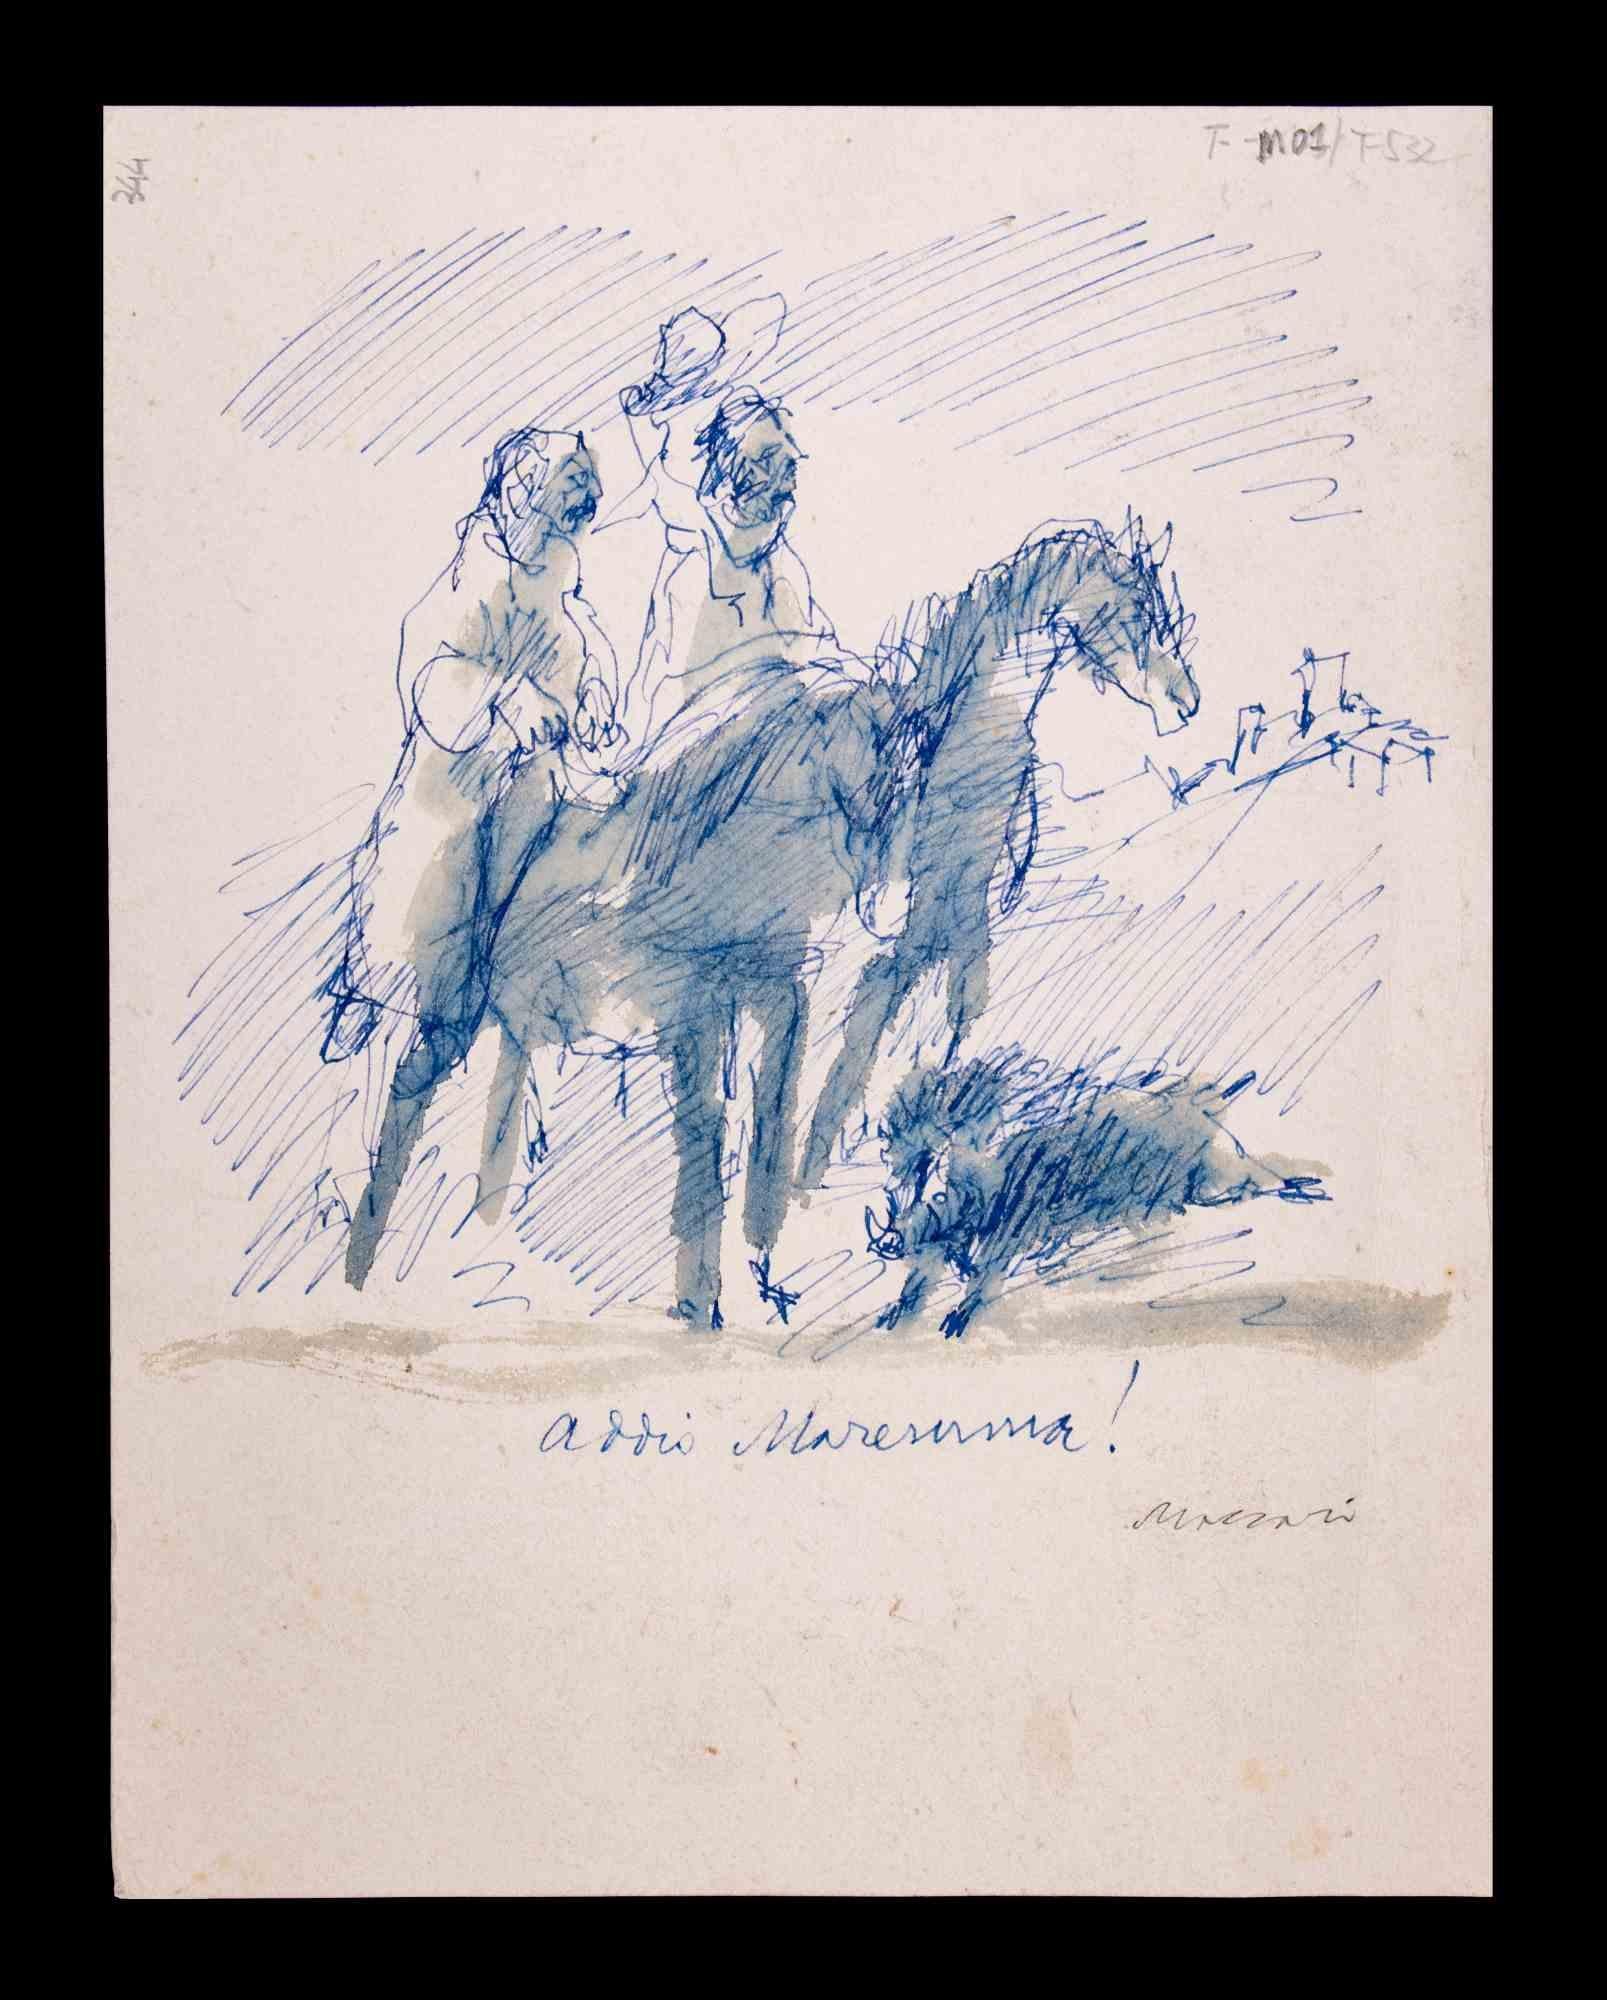 Goodbye Maremma is a Pen and Watercolour Drawing realized by Mino Maccari  (1924-1989) in 1970s.

Hand signed and titled on the lower margin.

Good condition on a white cardboard.

Mino Maccari (Siena, 1924-Rome, June 16, 1989) was an Italian